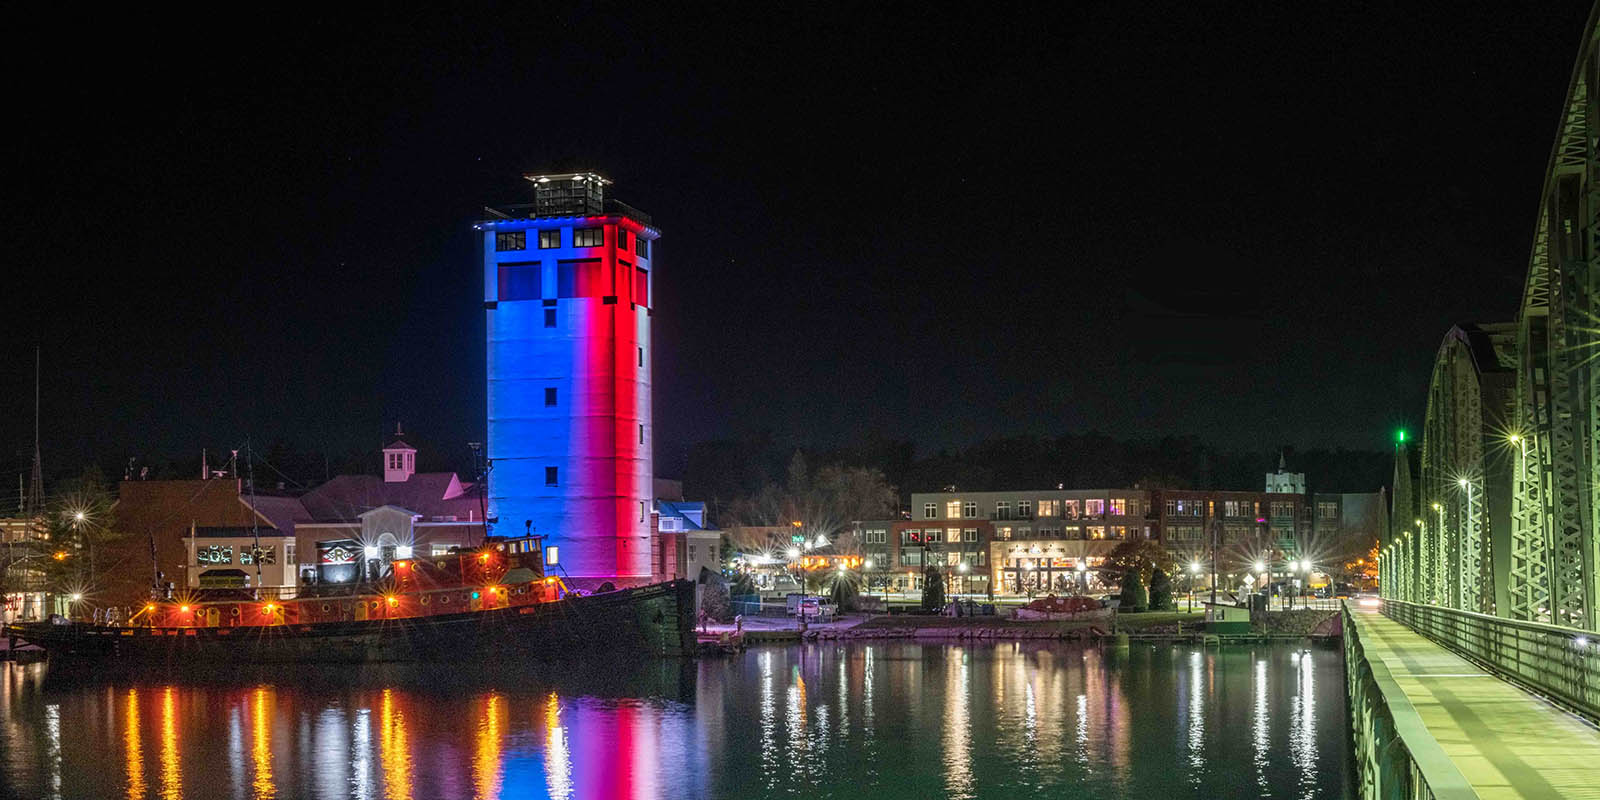 The 11 story tower with red, white and blue color-changing LED lights at the Door County Maritime Museum in Sturgeon Bay, WI